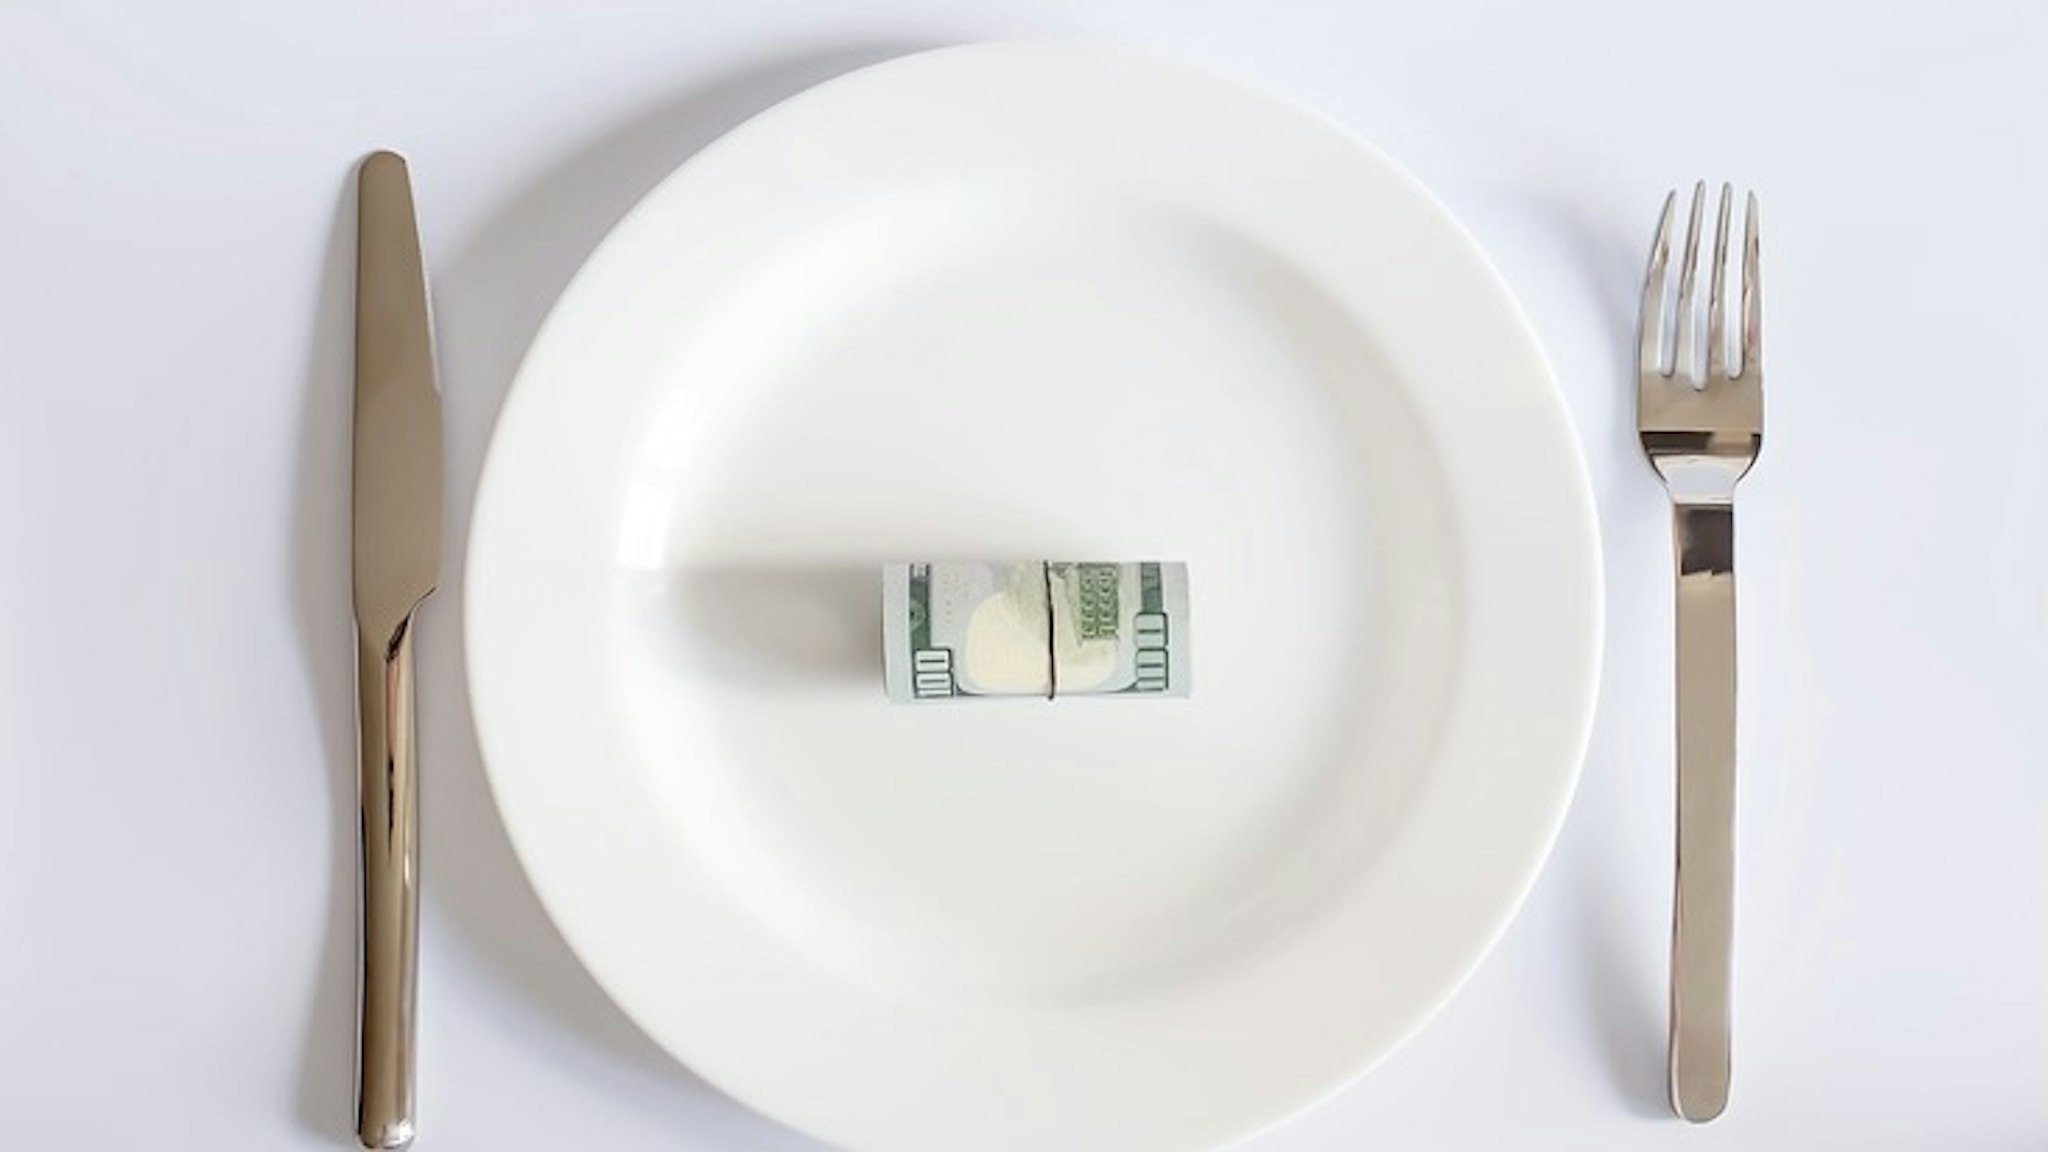 A dollar bill on a white plate between a fork and a knife on white background, - stock photo A dollar bill on a white plate between a fork and a knife on white background,business concept Iryna Drozd via Getty Images